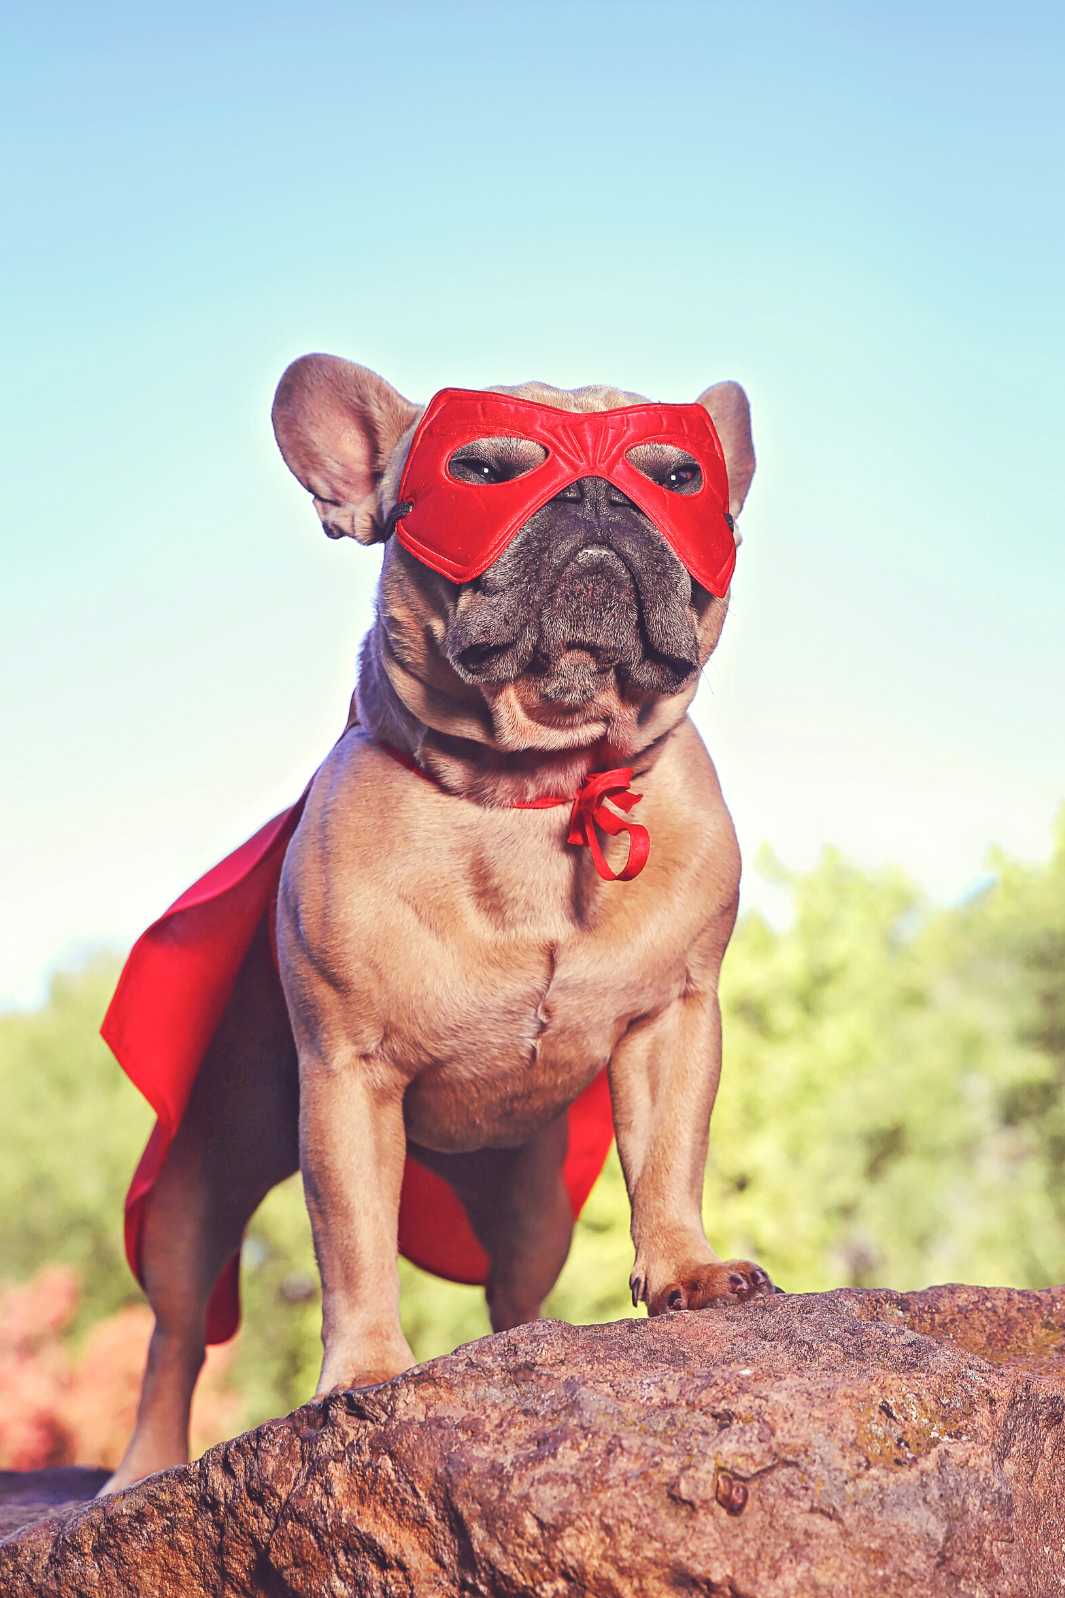 French Bulldog standing on a rock ledge, looking out wearing a red cape and mask.